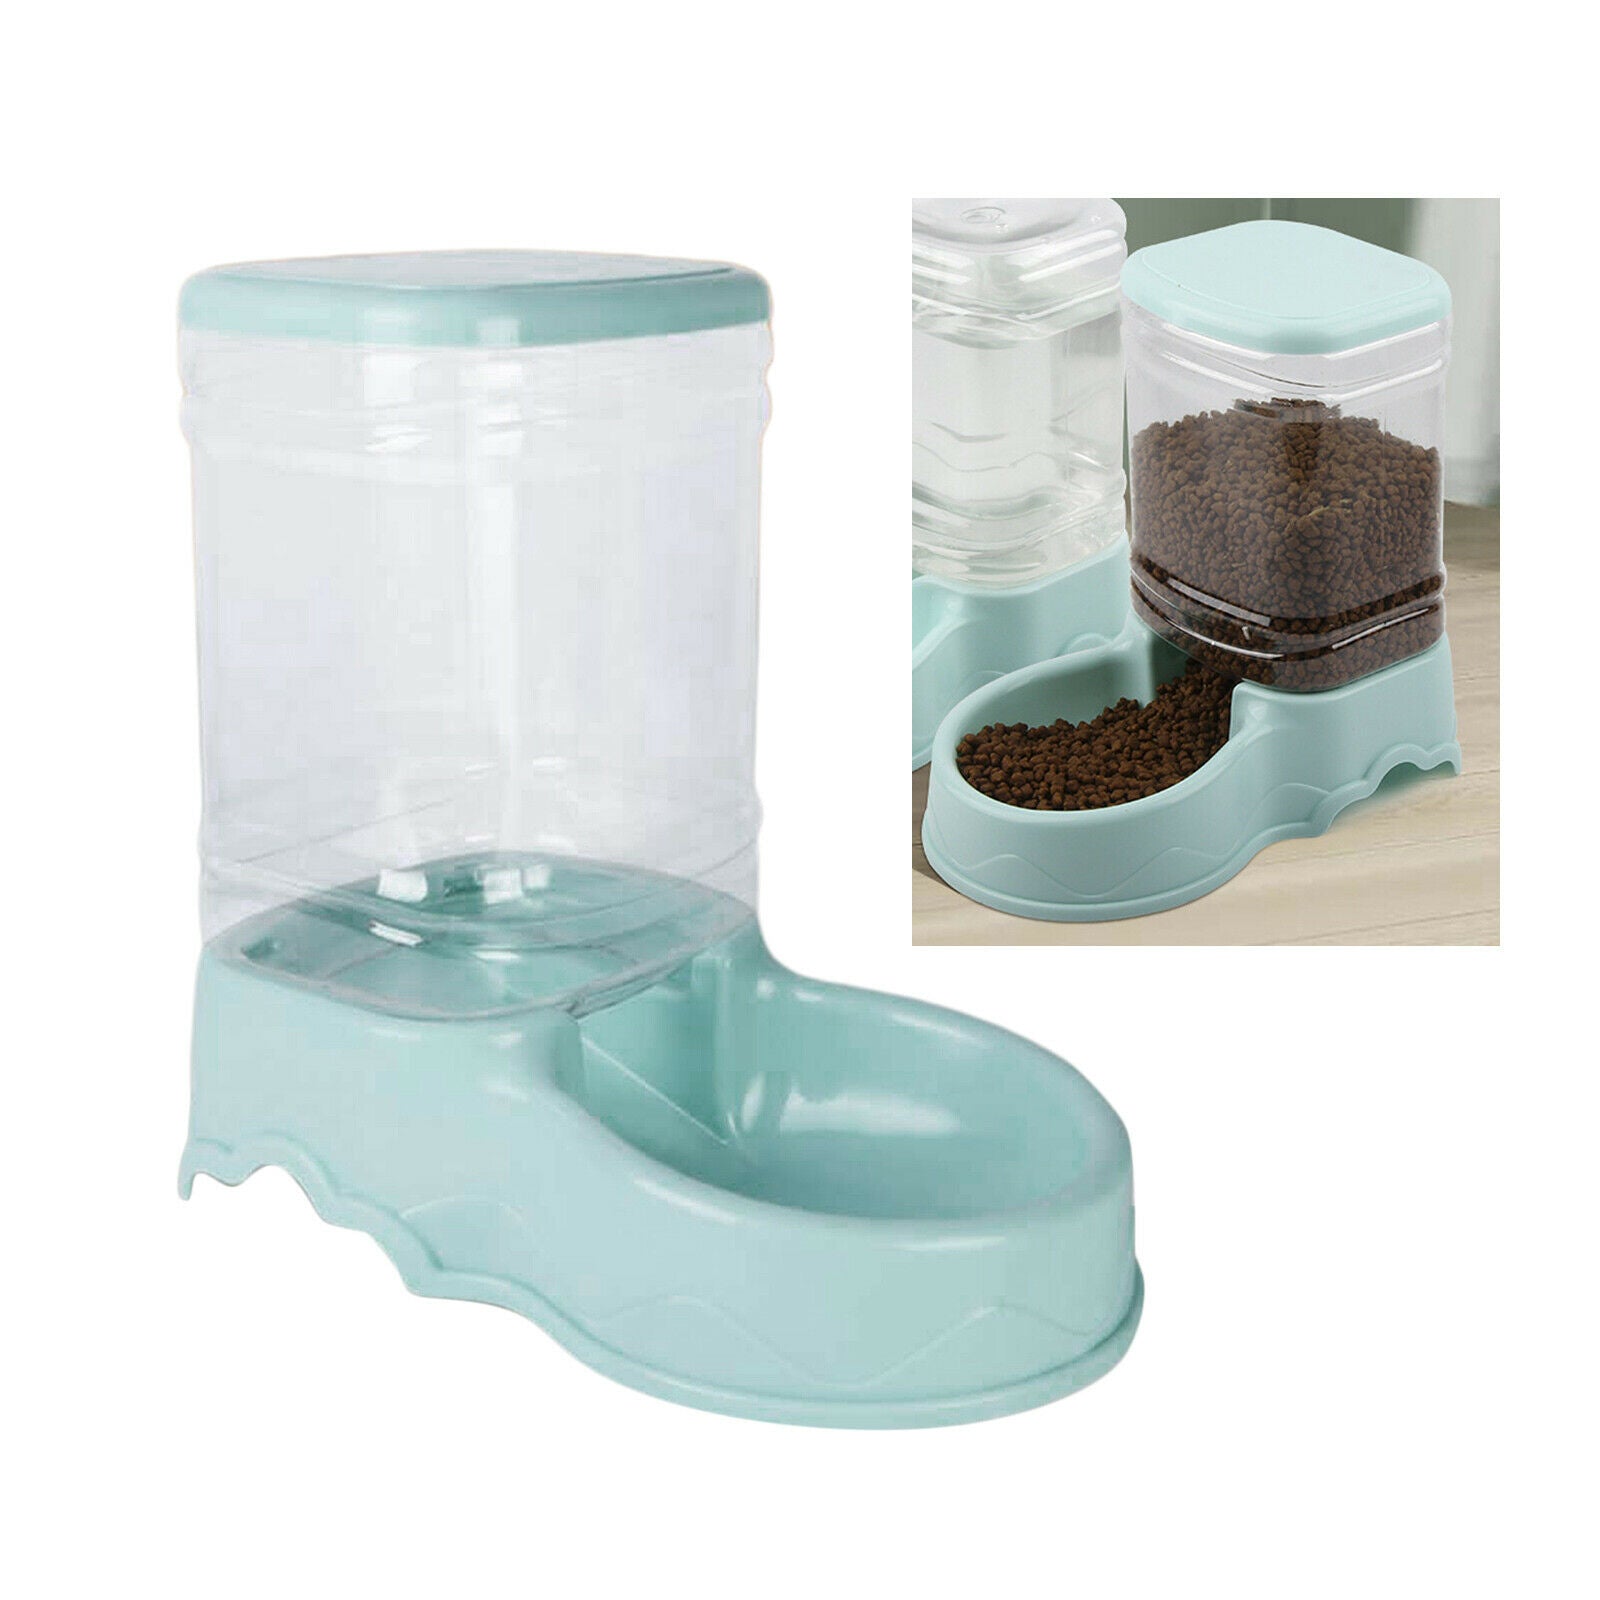 2 2pcs 3.5L Automatic Pet Feeder Cats Large Water Feeder WATER DISPENSER